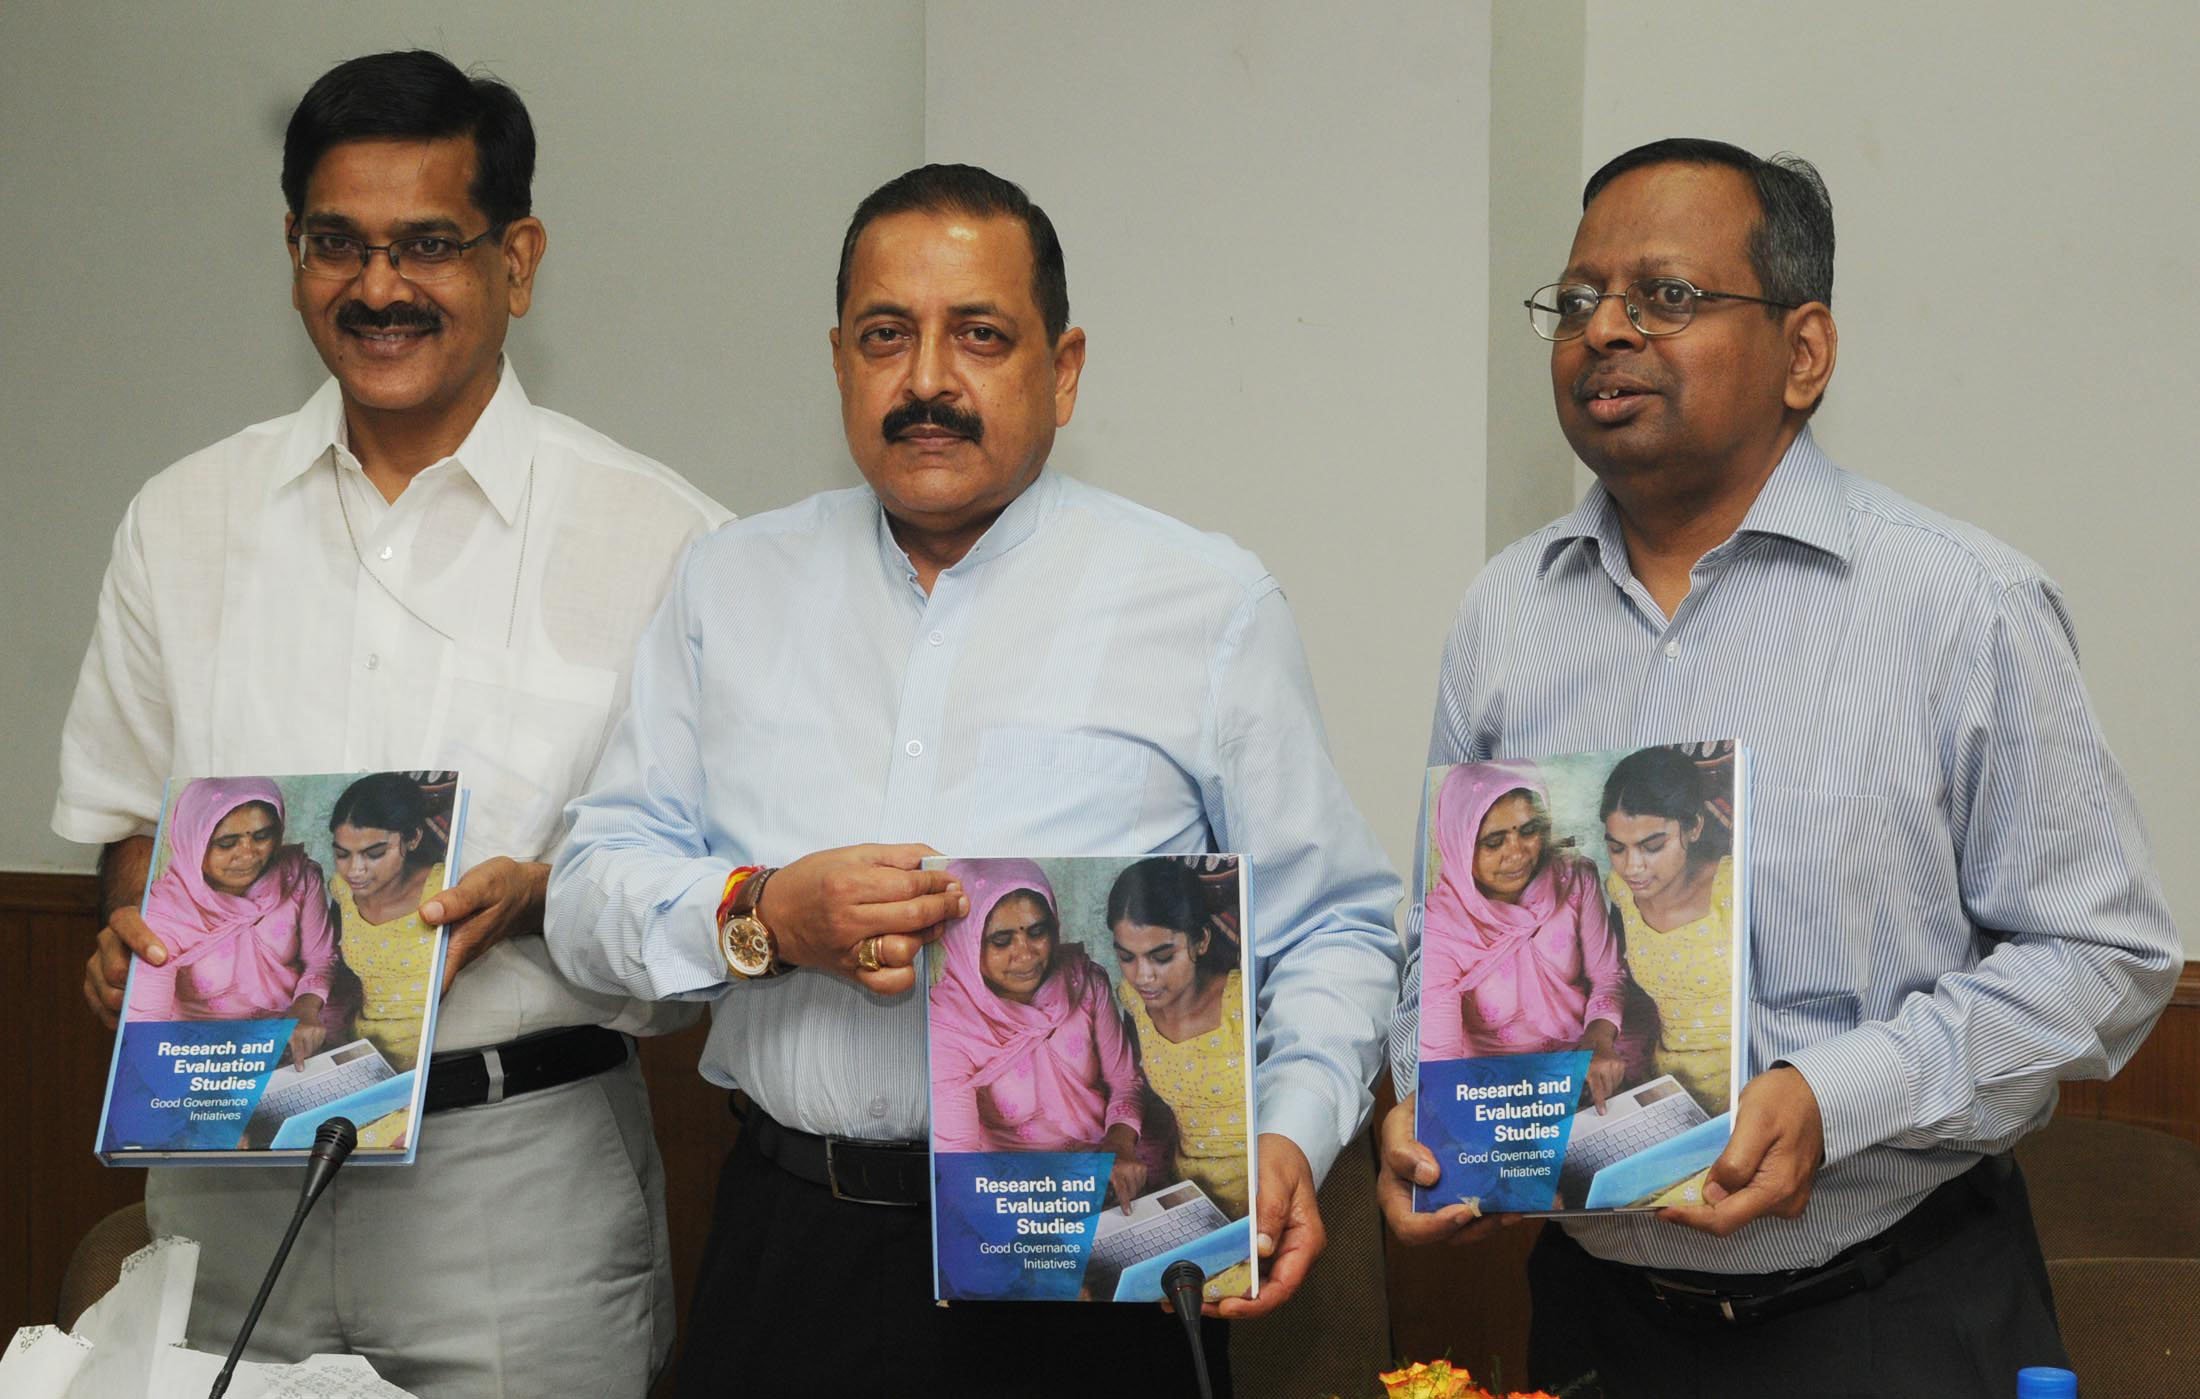 Dr. Jitendra Singh releasing the report on Research & Evaluation Studies on ‘’Accountability and Transparency”